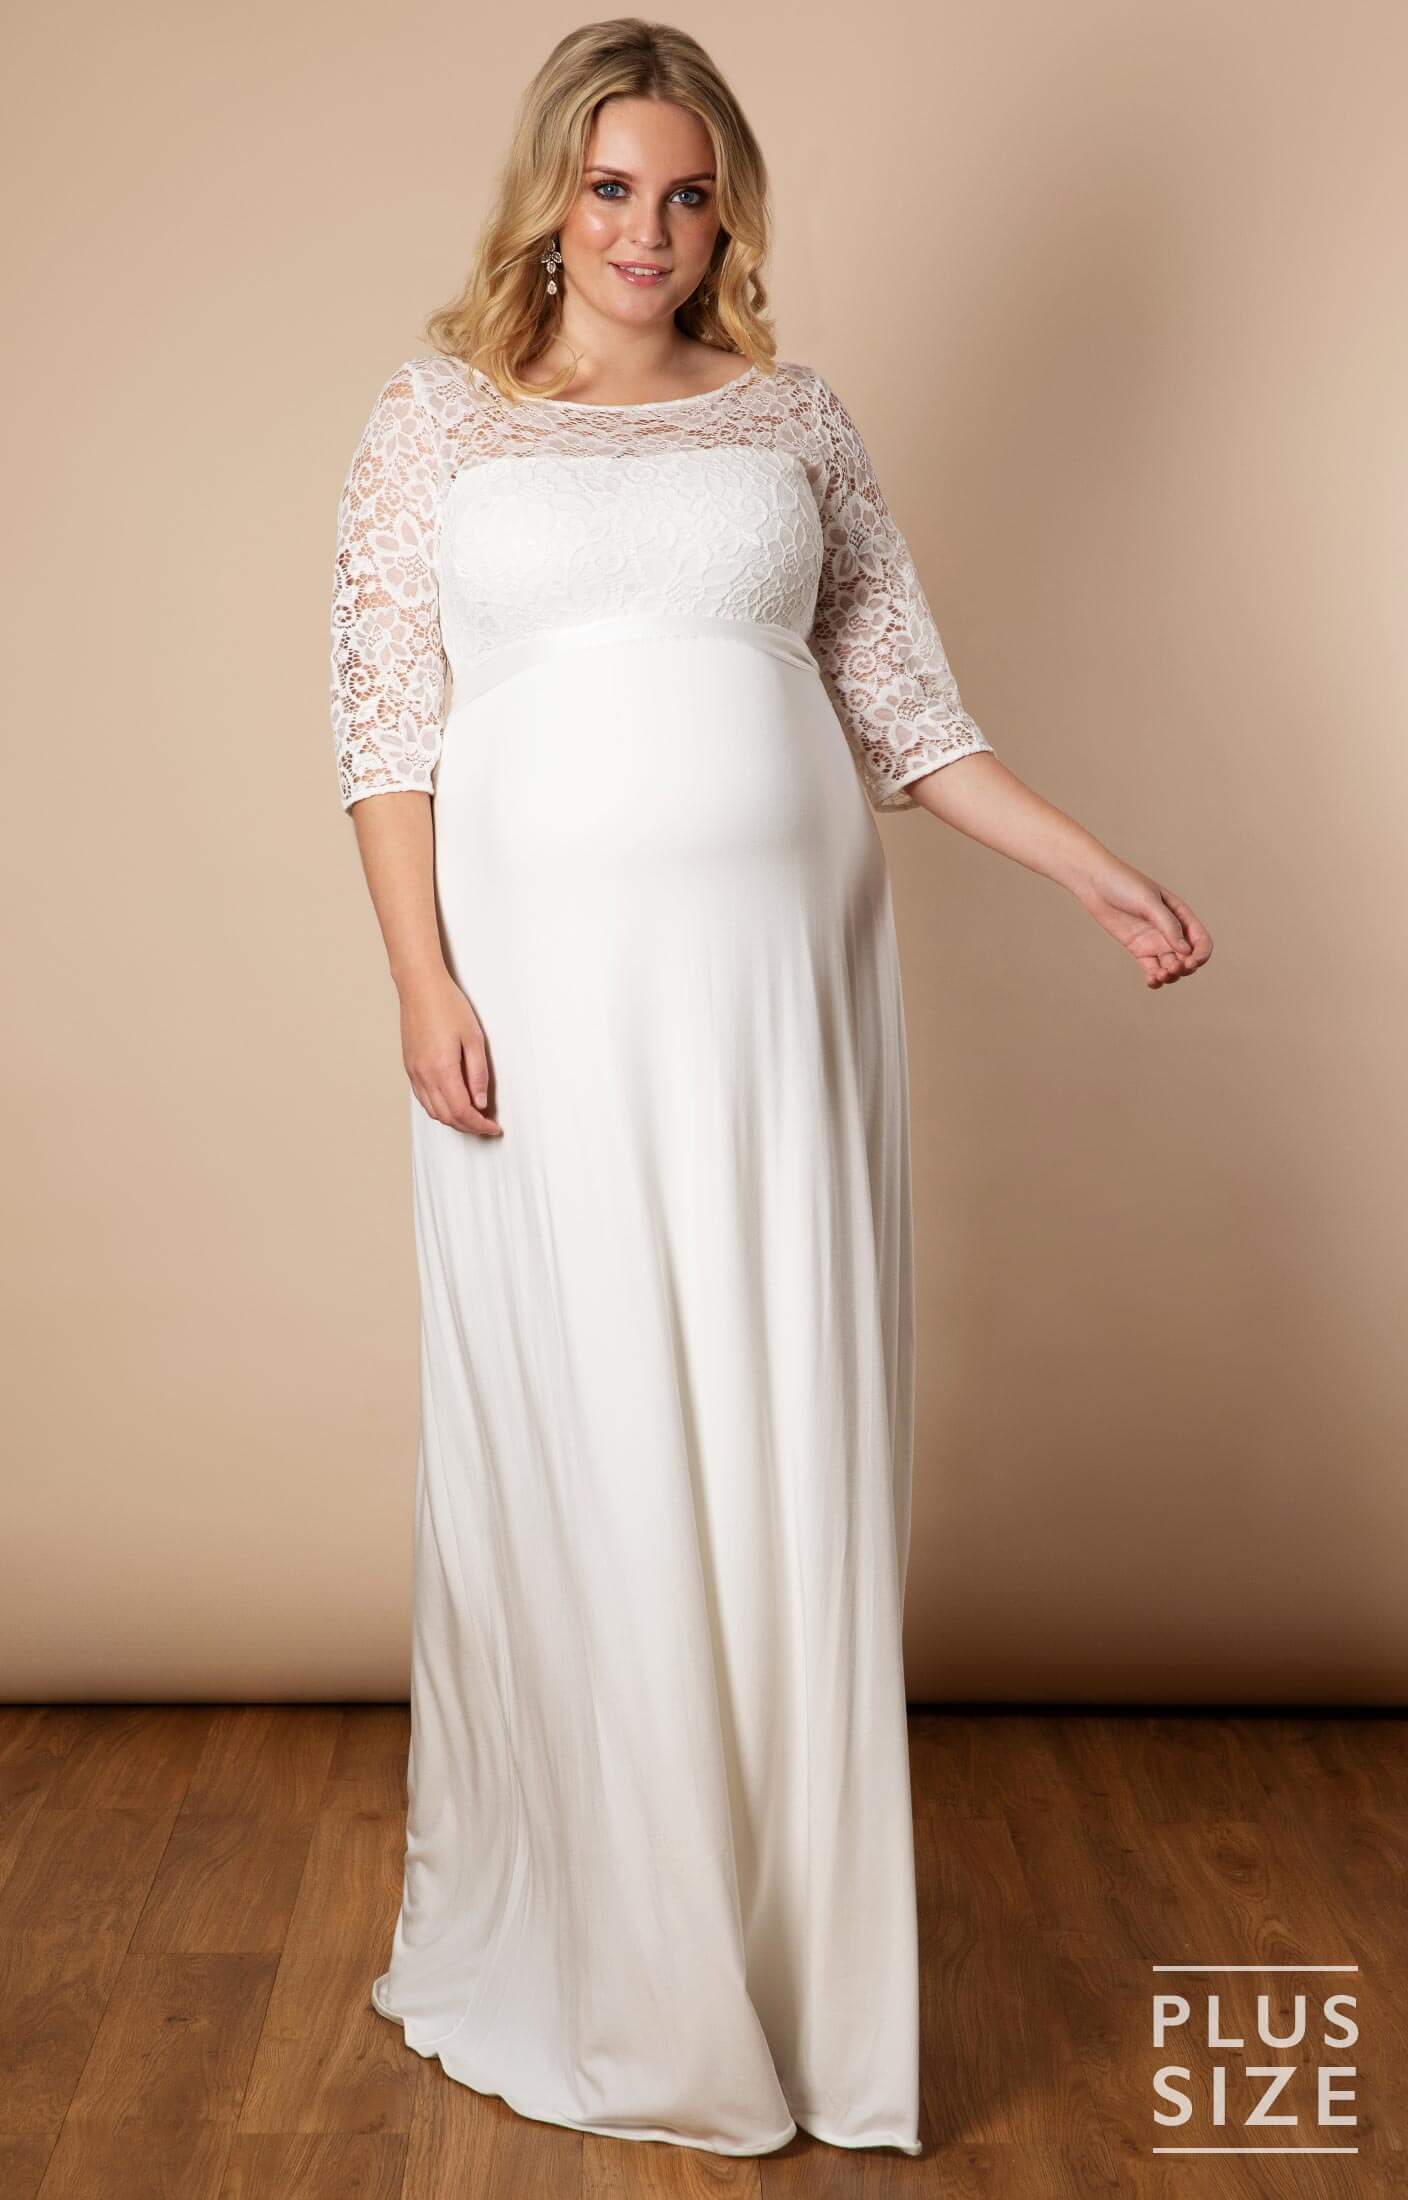 The Plus Size Bridal Lingerie Styles You Can't Wed Without - Dia & Co